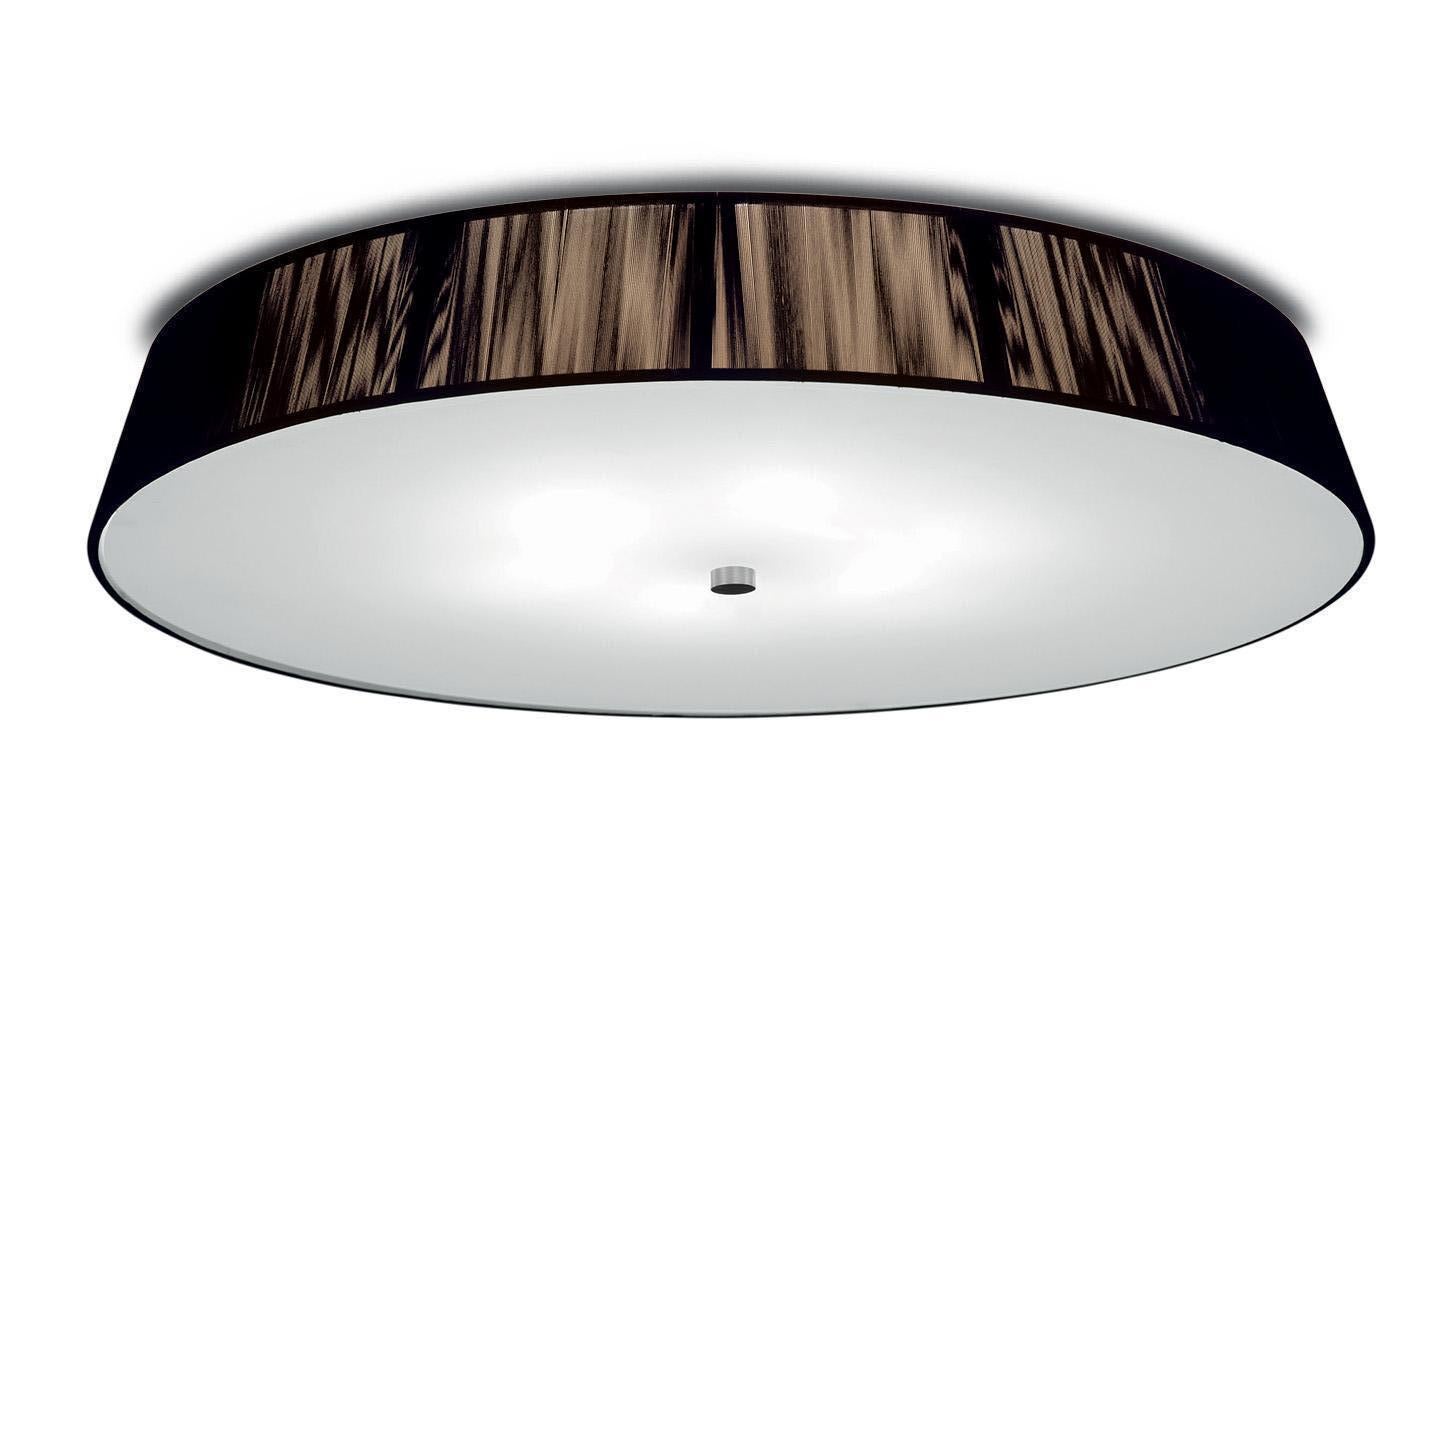 The Lilith ceiling lamp is an elegant lighting solution with a stunning light effect created by threading thin string in a consistent pattern across the shade. As you engage it from different viewpoints, the light pattern shimmers and changes. The